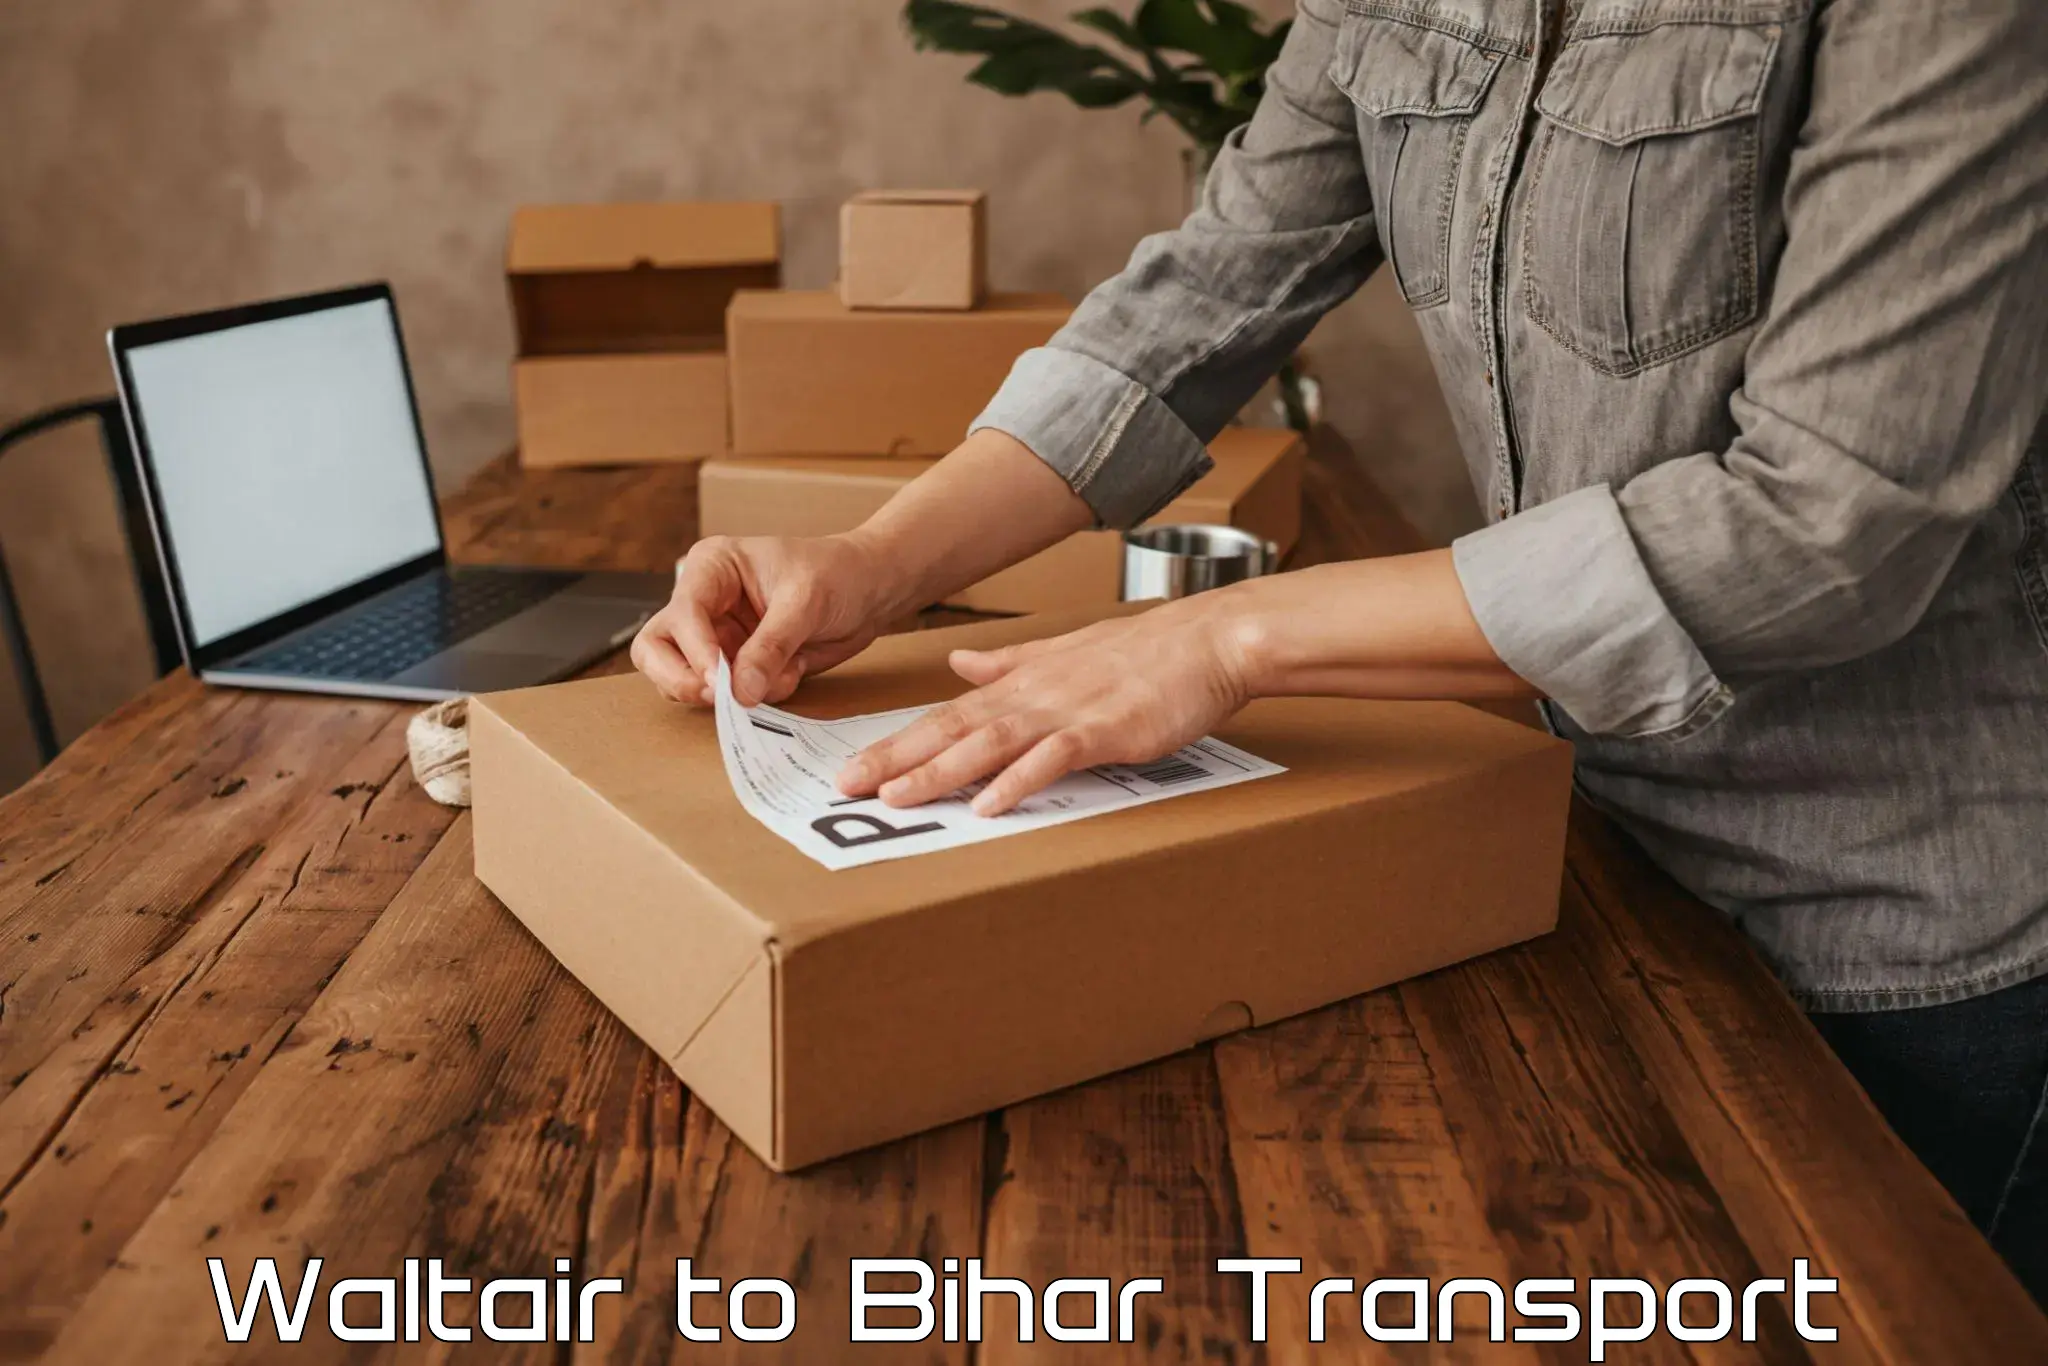 All India transport service Waltair to Bihar